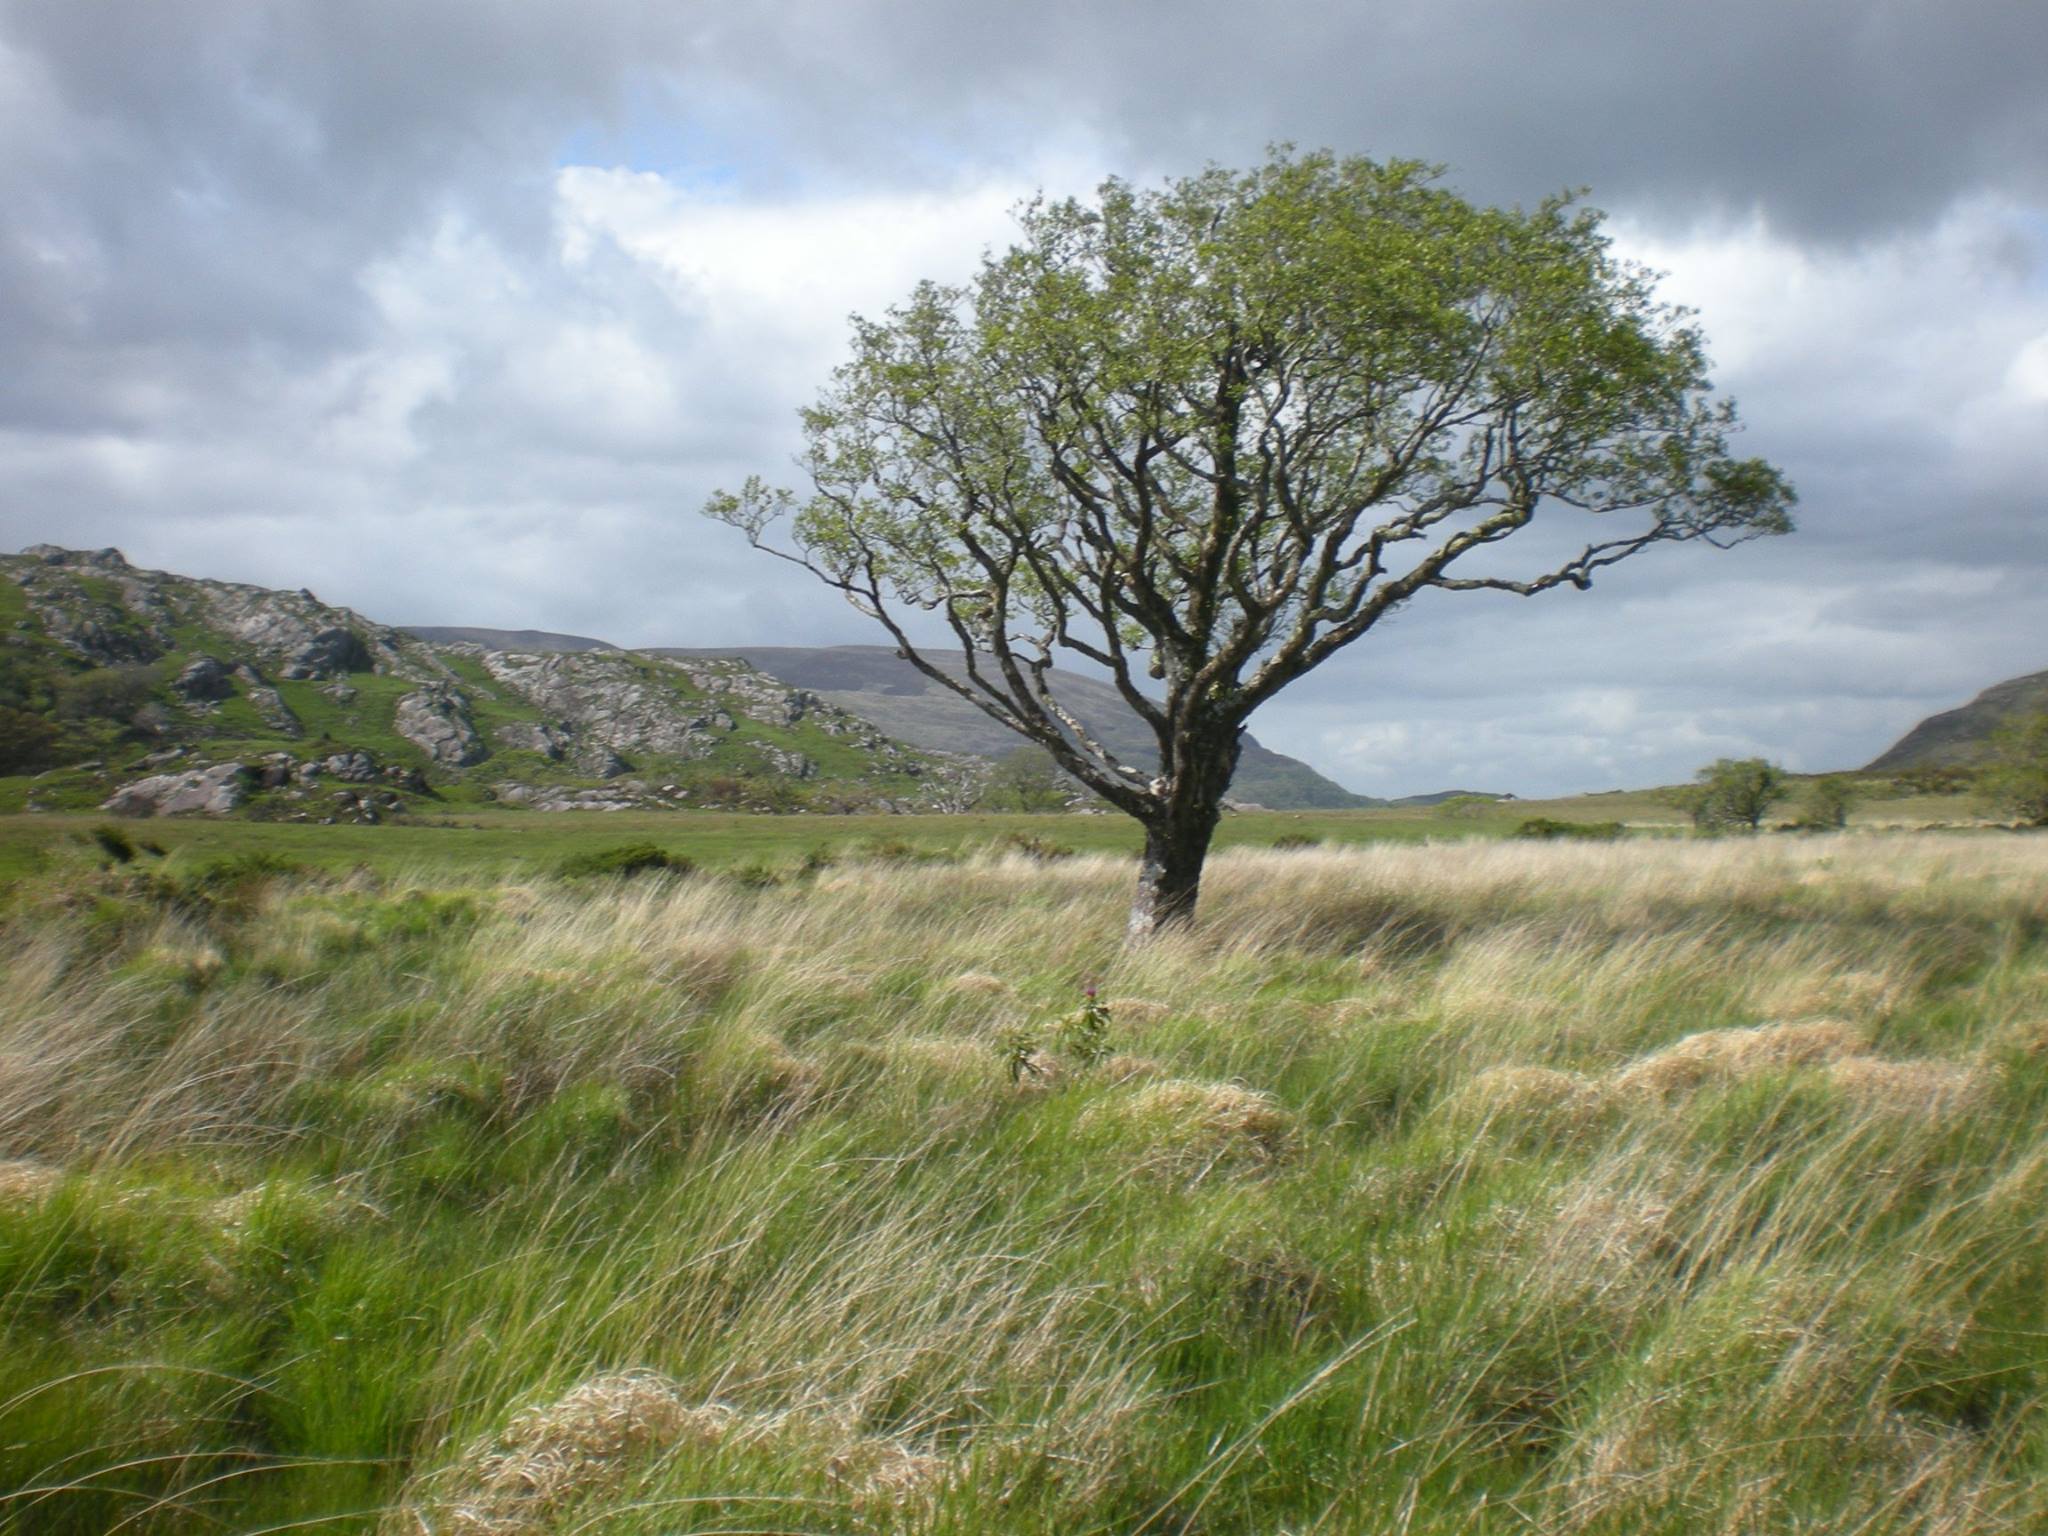 Pictures of Ireland Countryside - The Kerry Way - The Lone Tree